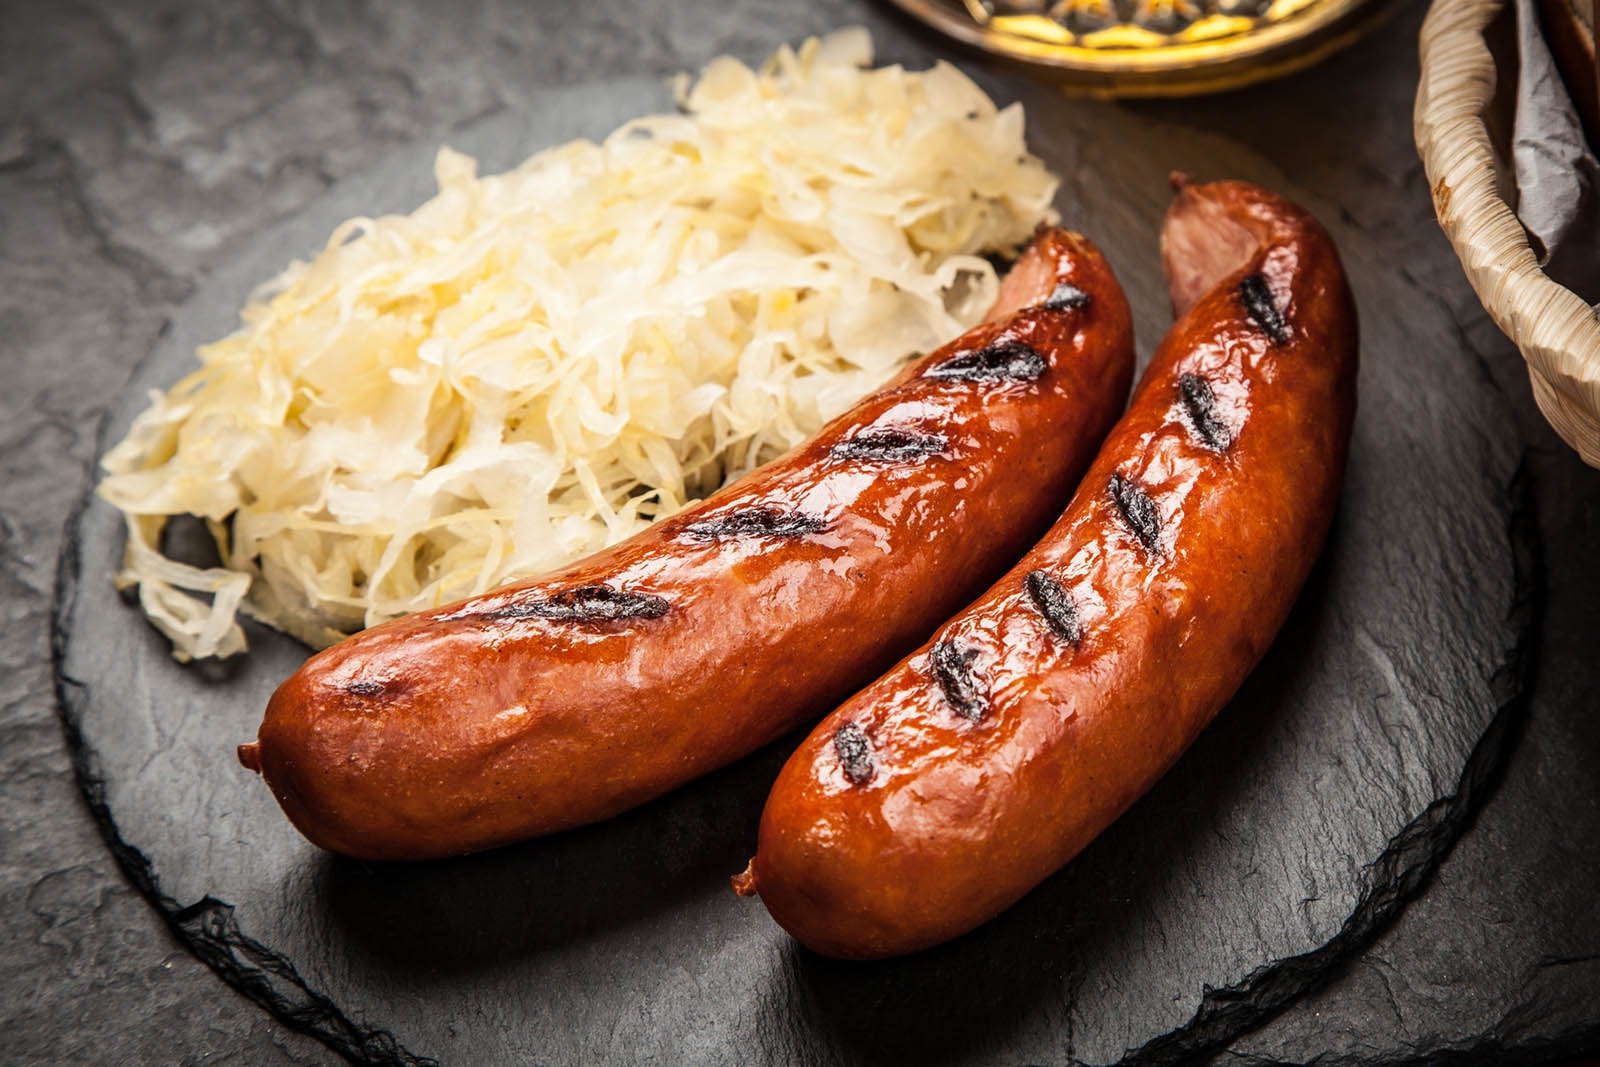 Say “Yuck” Or “Yum” to These Foods and We’ll Determine Your Exact Age Bratwurst sausages and sauerkraut